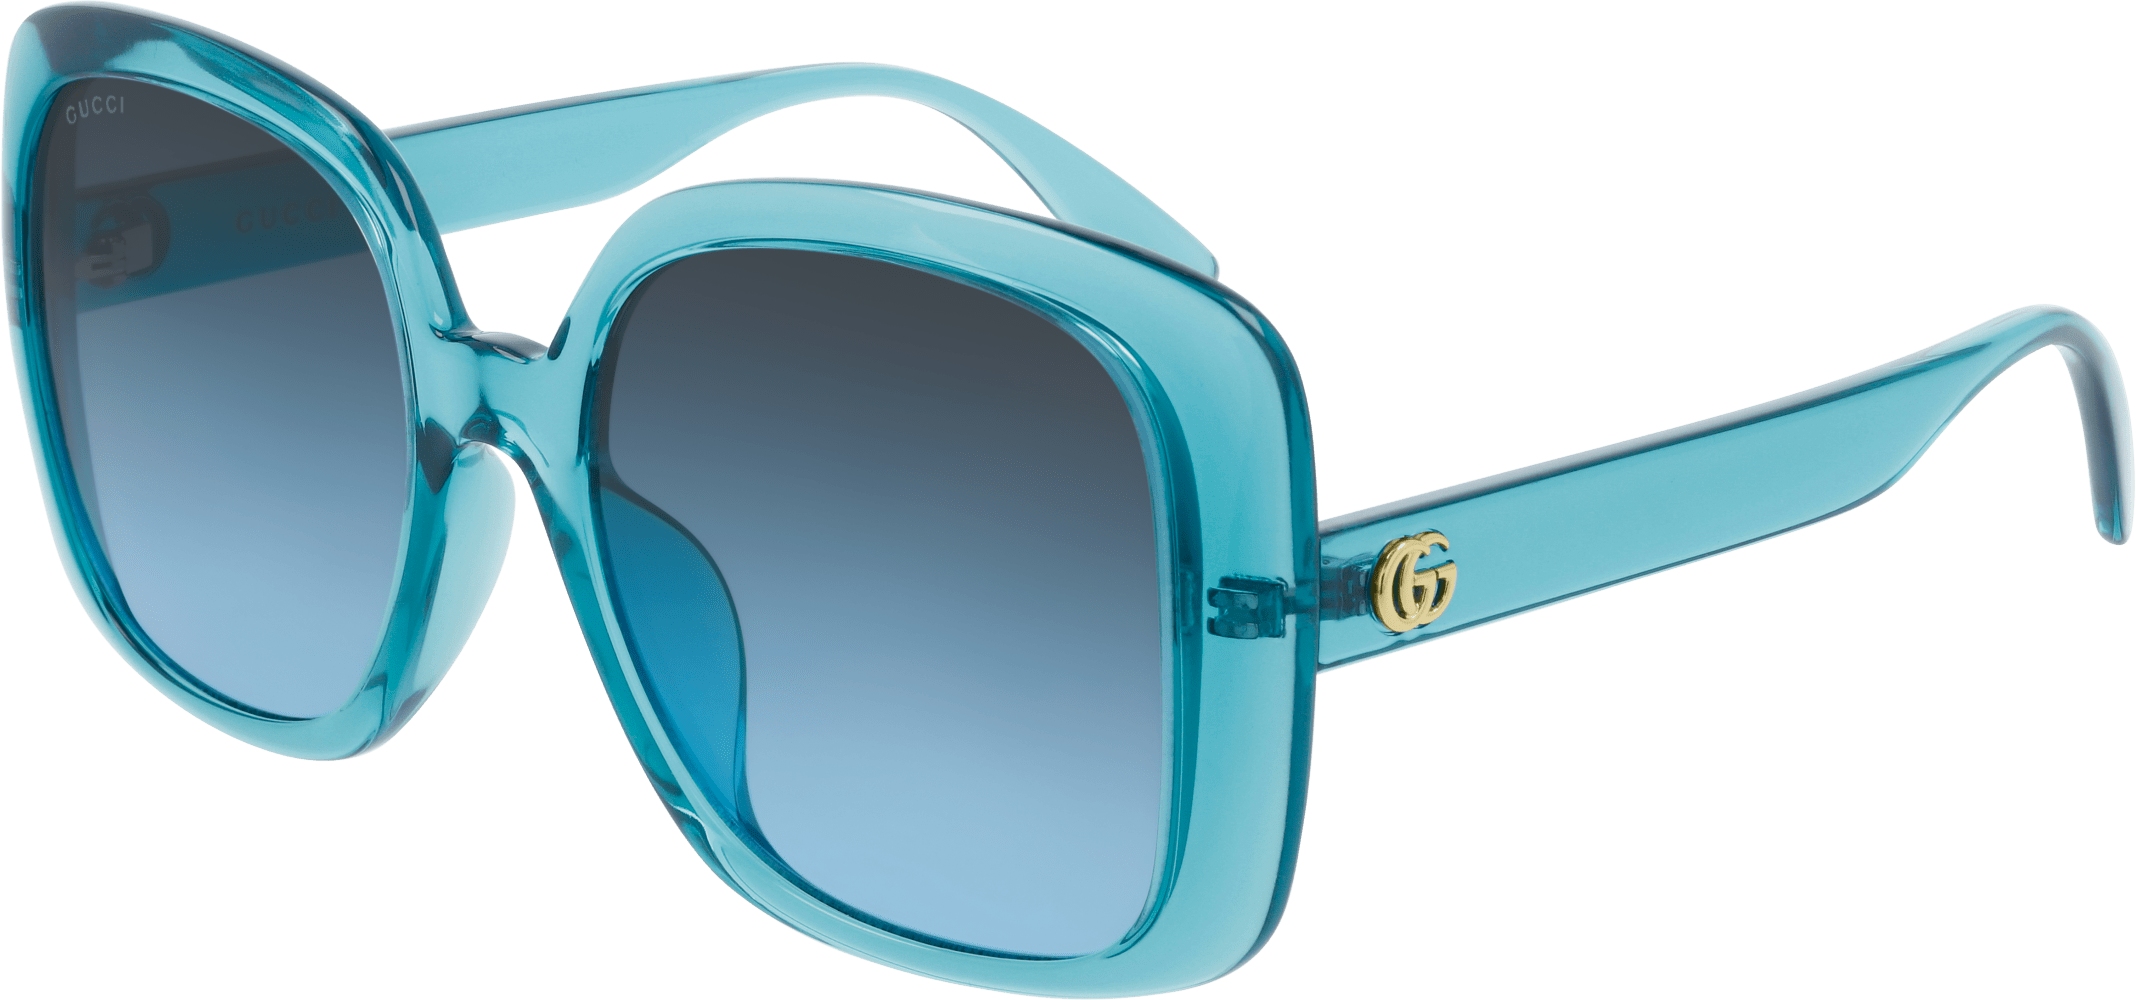 Gucci 57 mm Blue Sunglasses | World of Watches